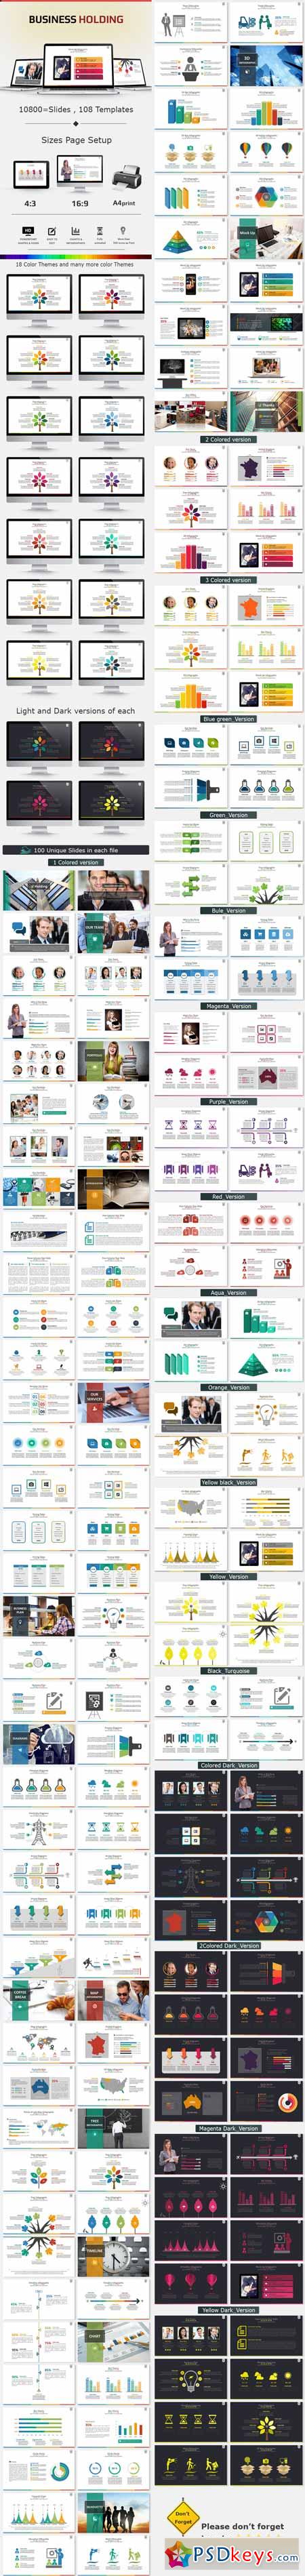 Business Holding Presentation Template 11168856